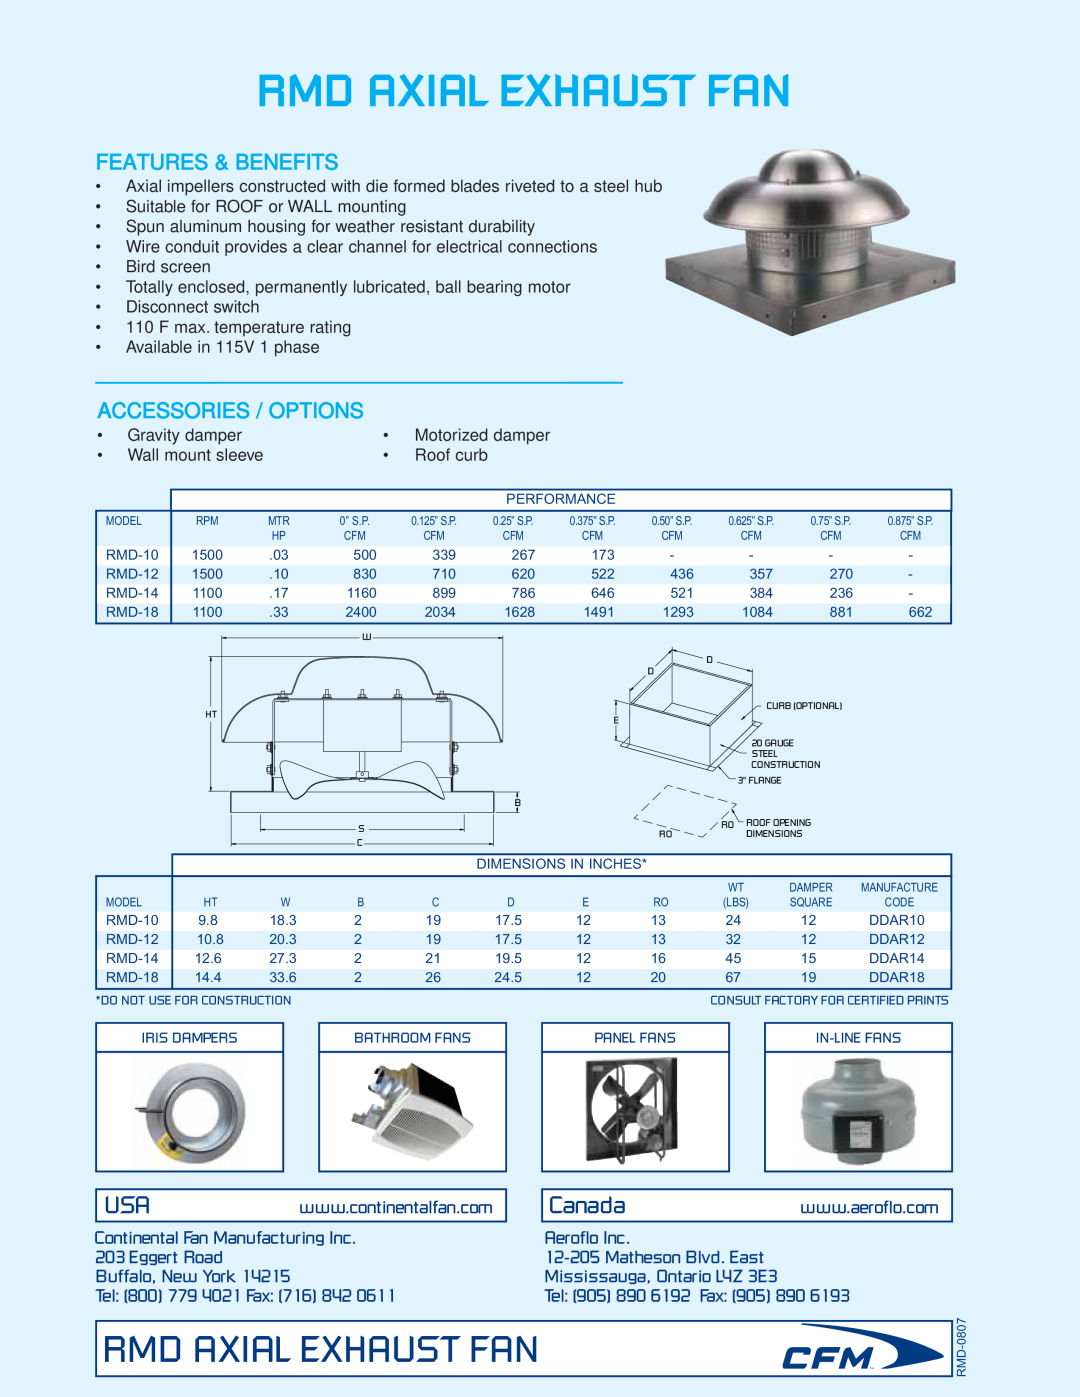 CFM RMD-14 Rmd Axial Exhaust Fan, Features & Benefits, Accessories / Options, Tel 800 779 4021 Fax, Tel 905 890 6192 Fax 